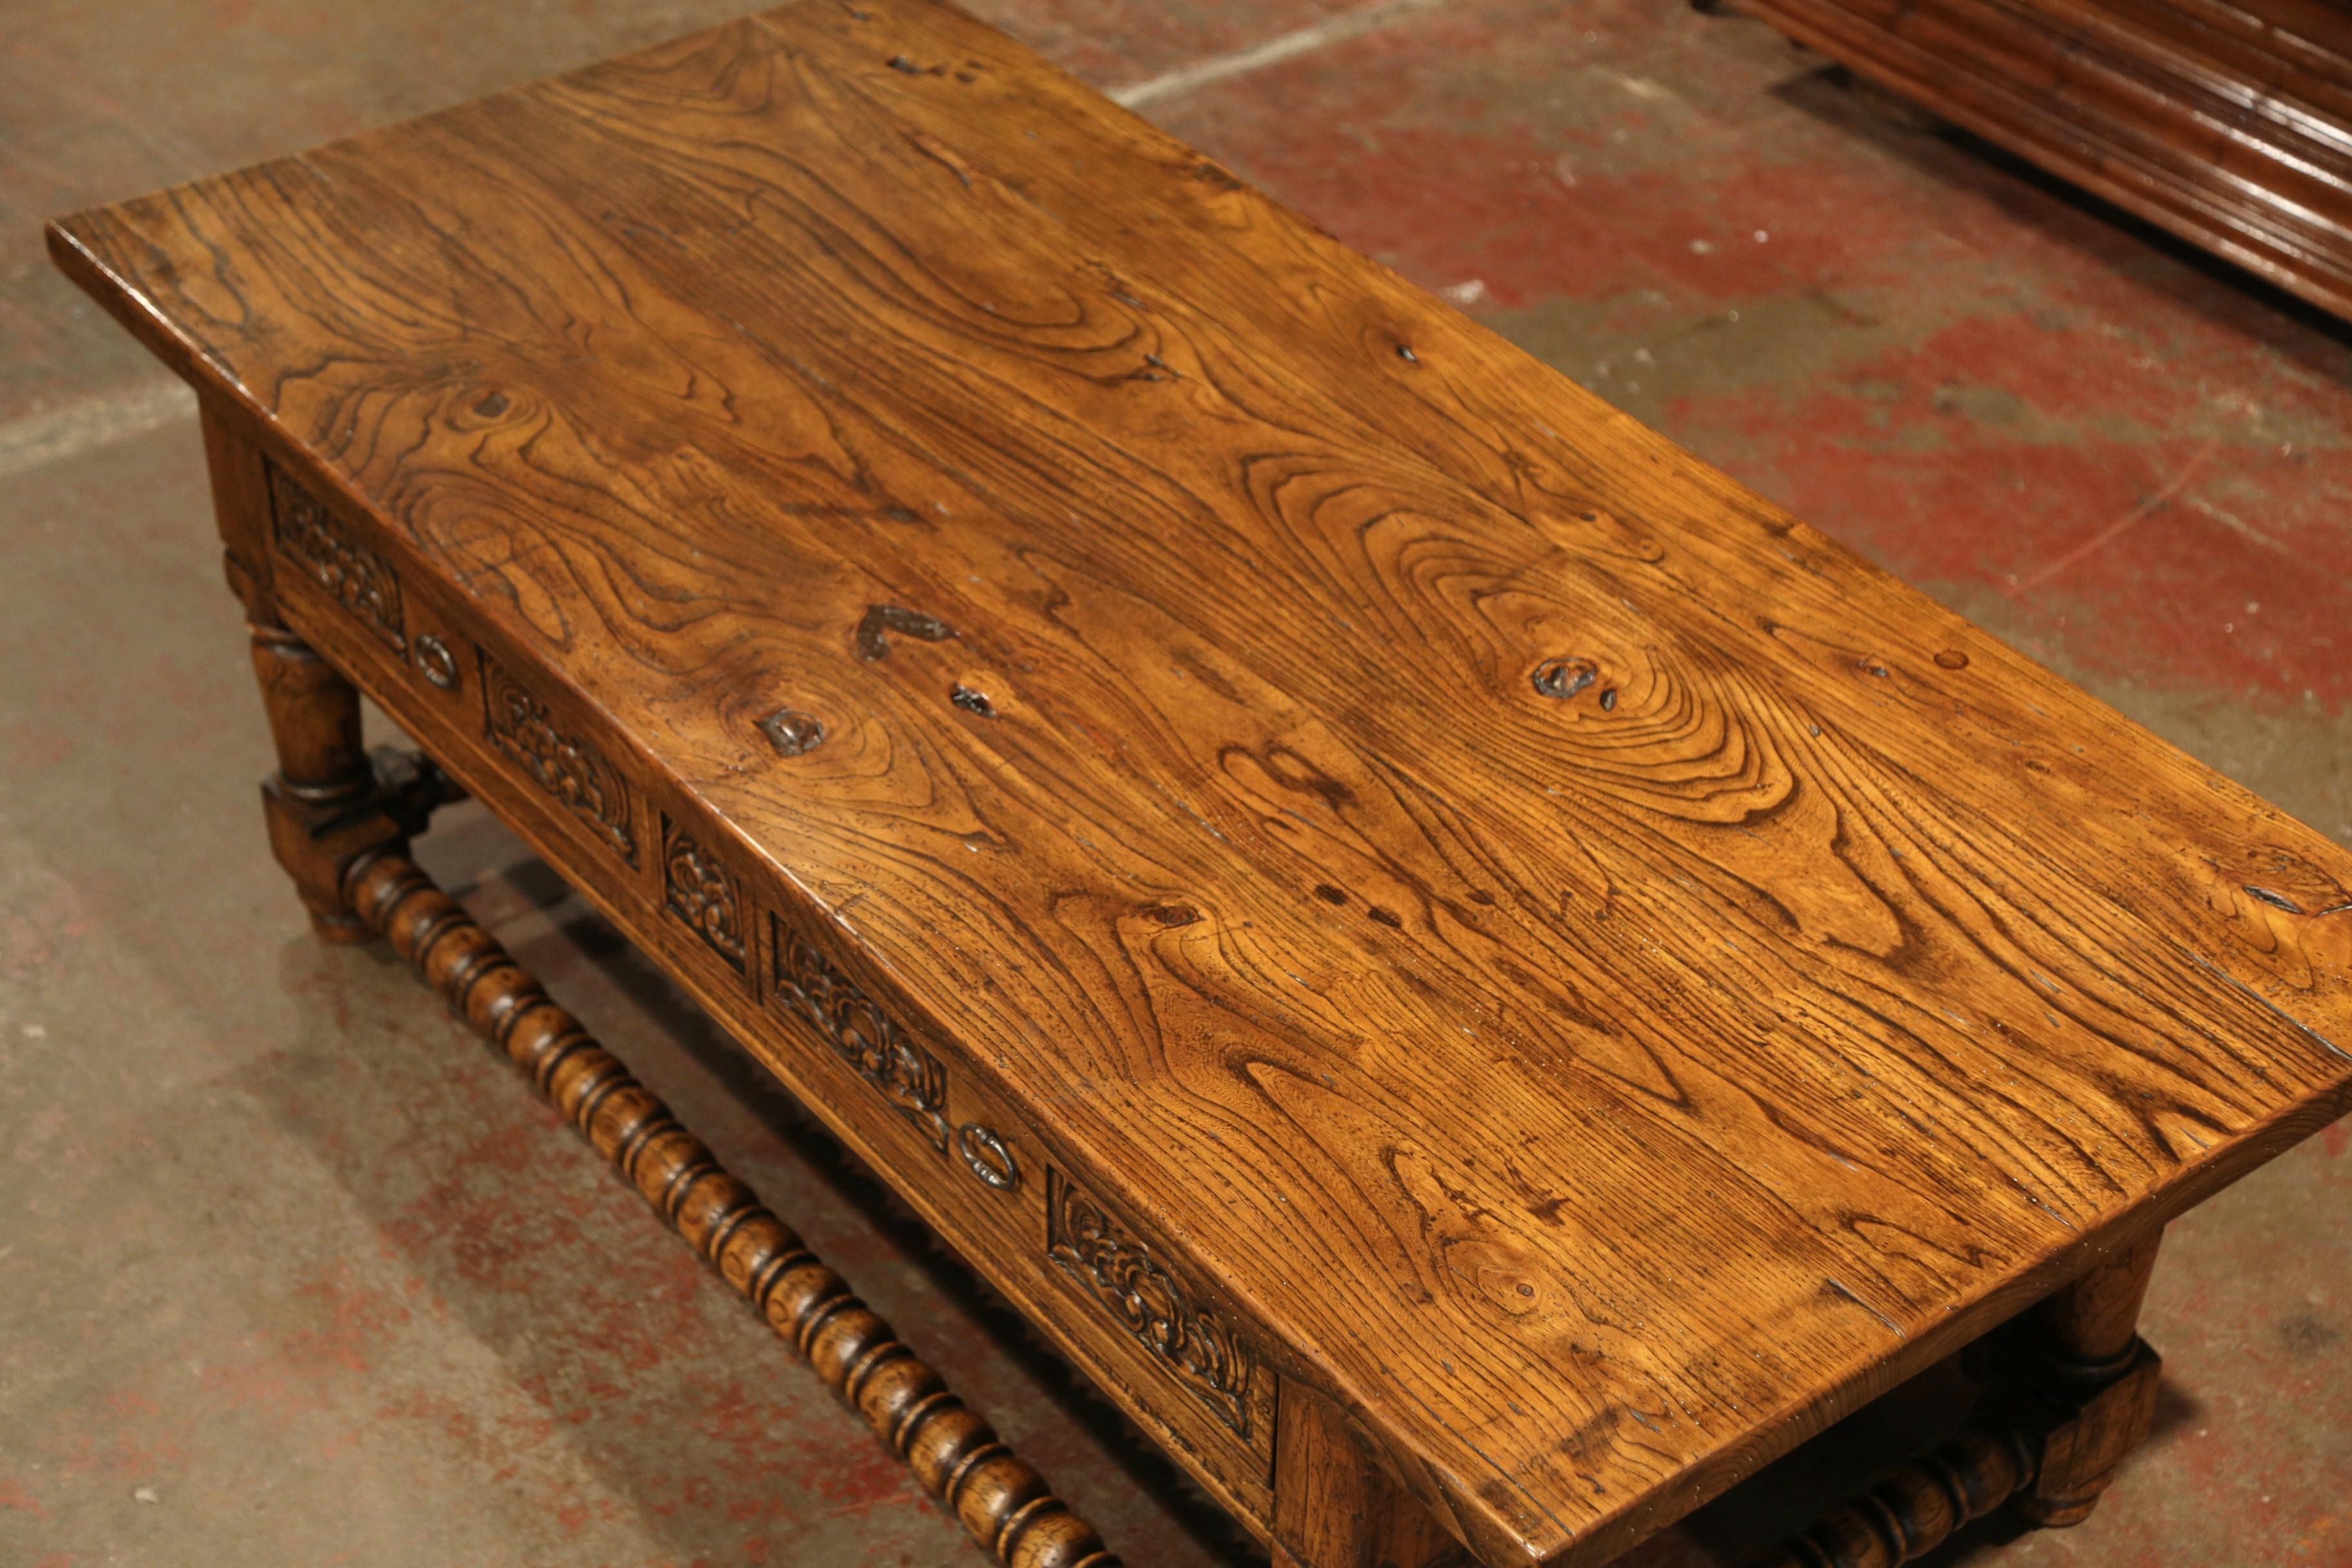 Patinated Early 20th Century French Louis XIII Carved Chestnut Coffee Table with Drawers